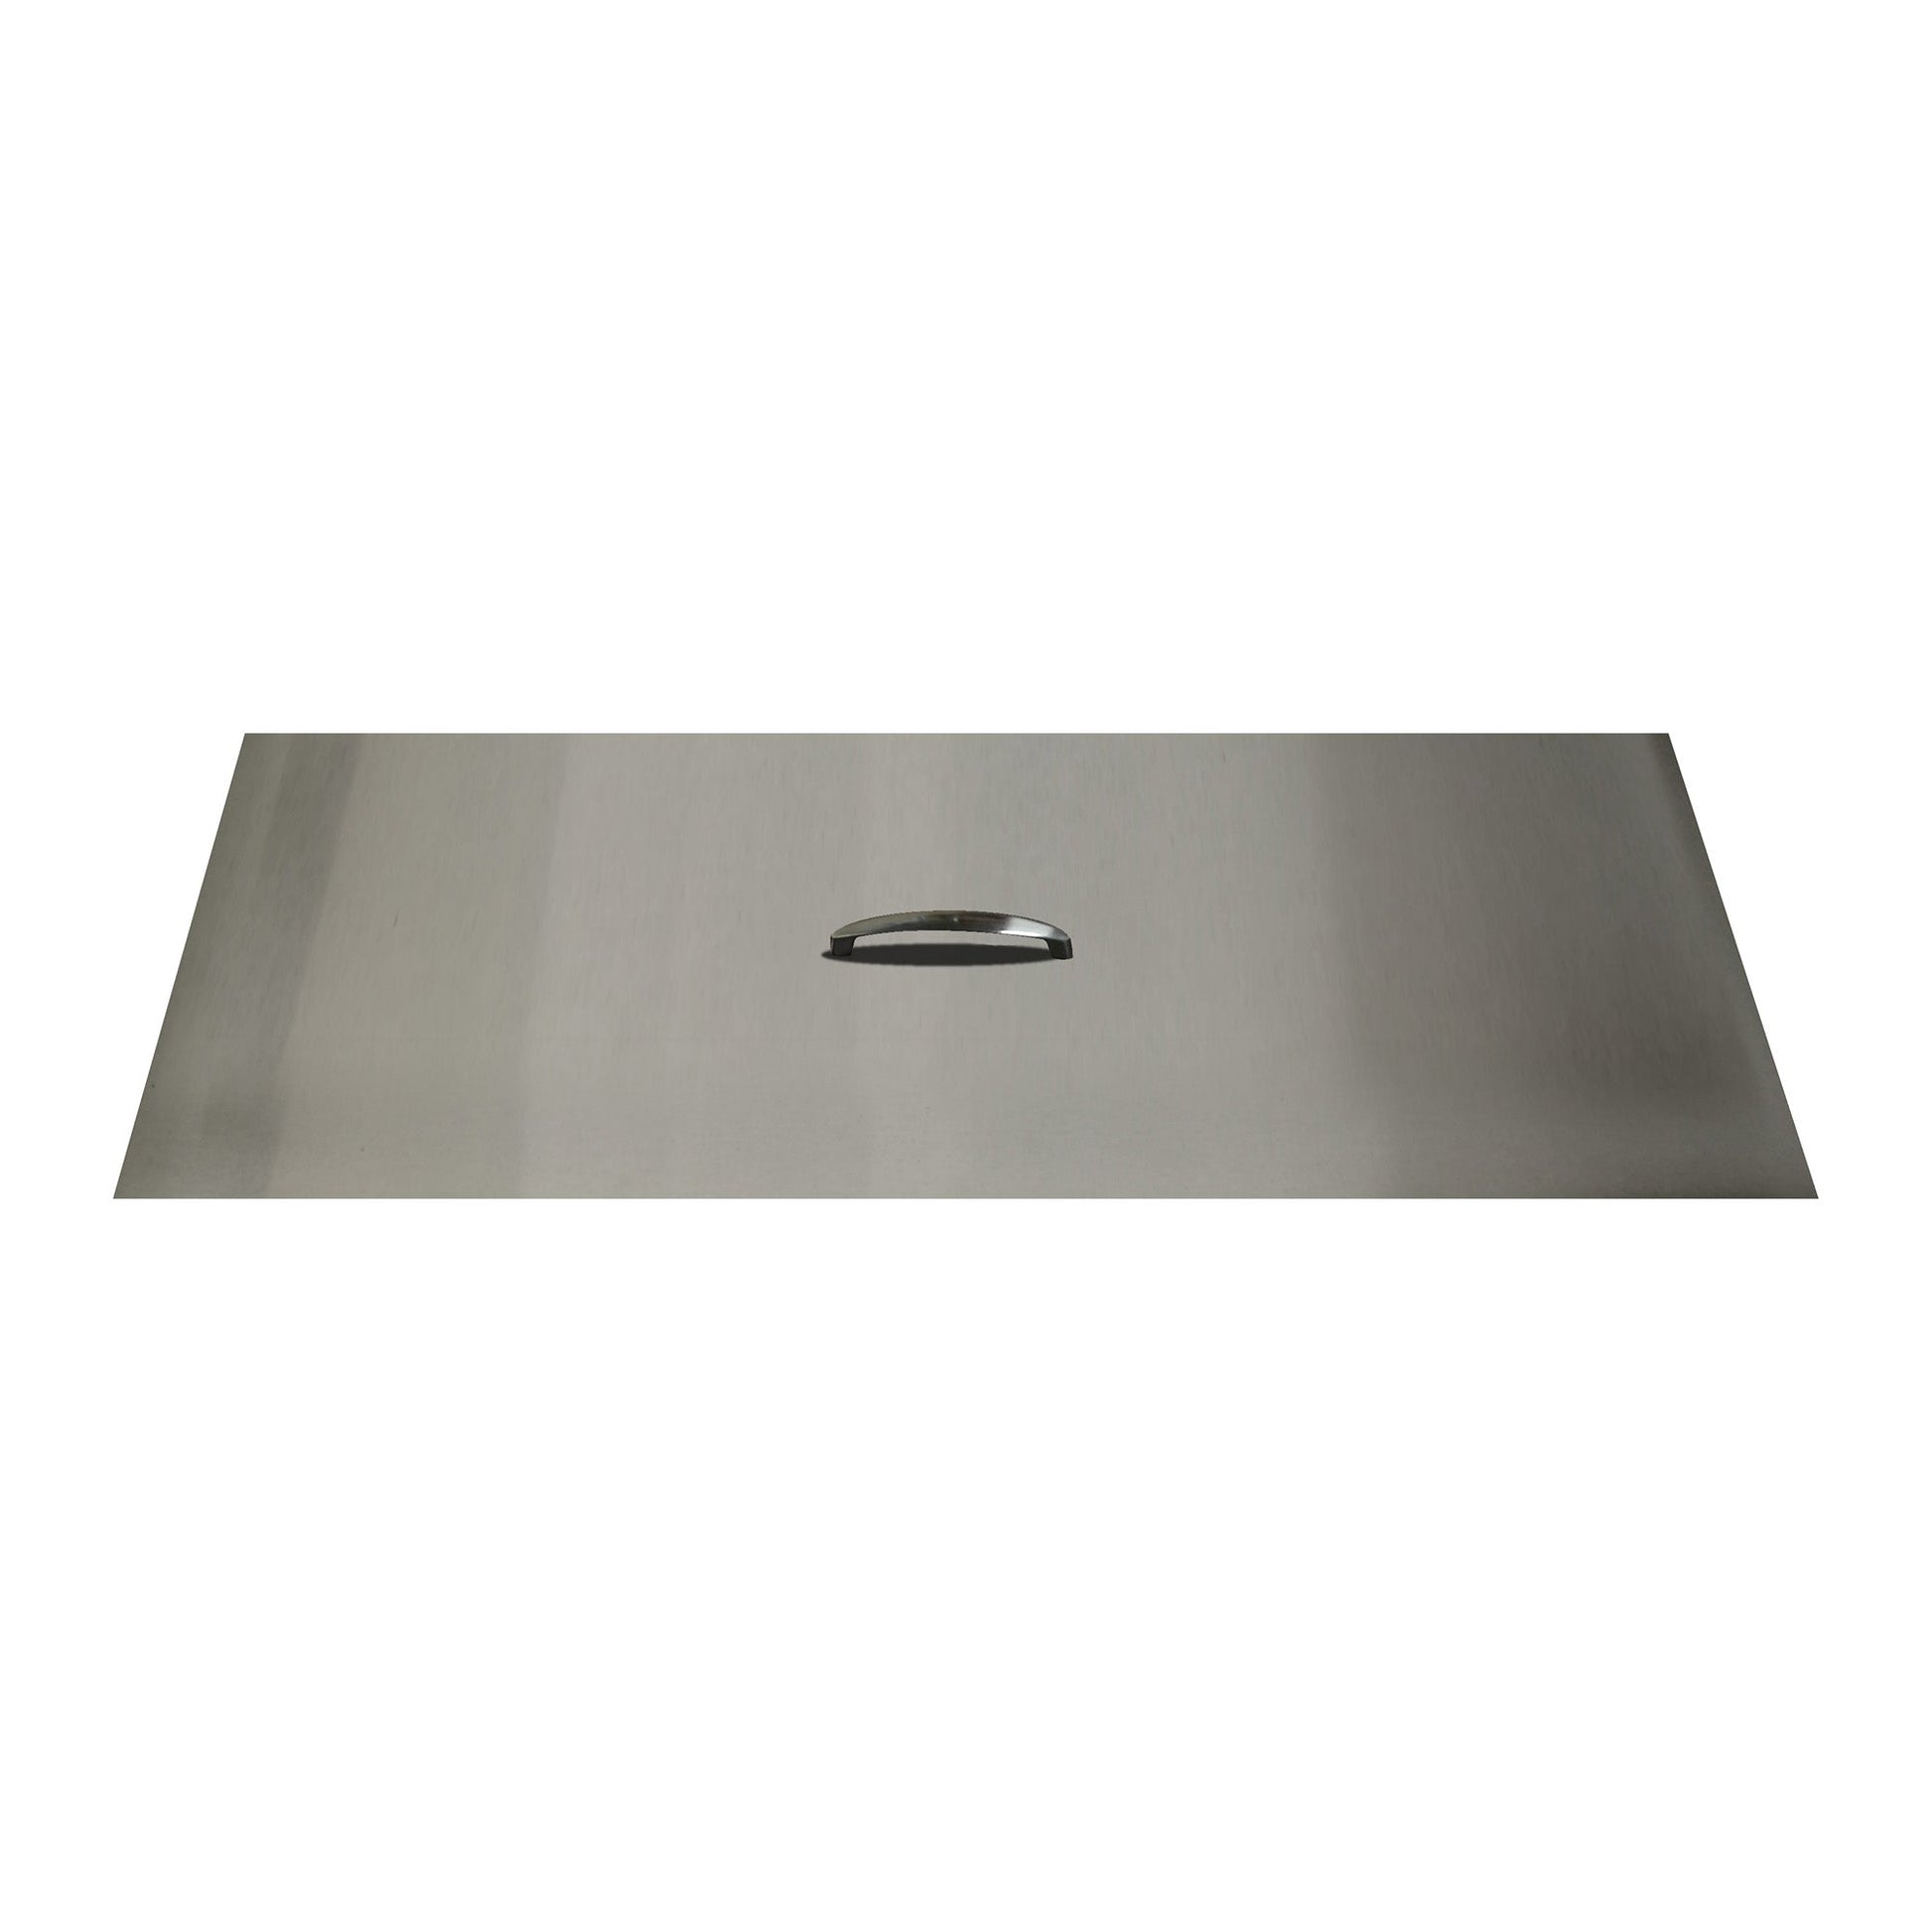 The Outdoor Plus 16" x 52" Stainless Steel Rectangular Fire Pit Lid Cover